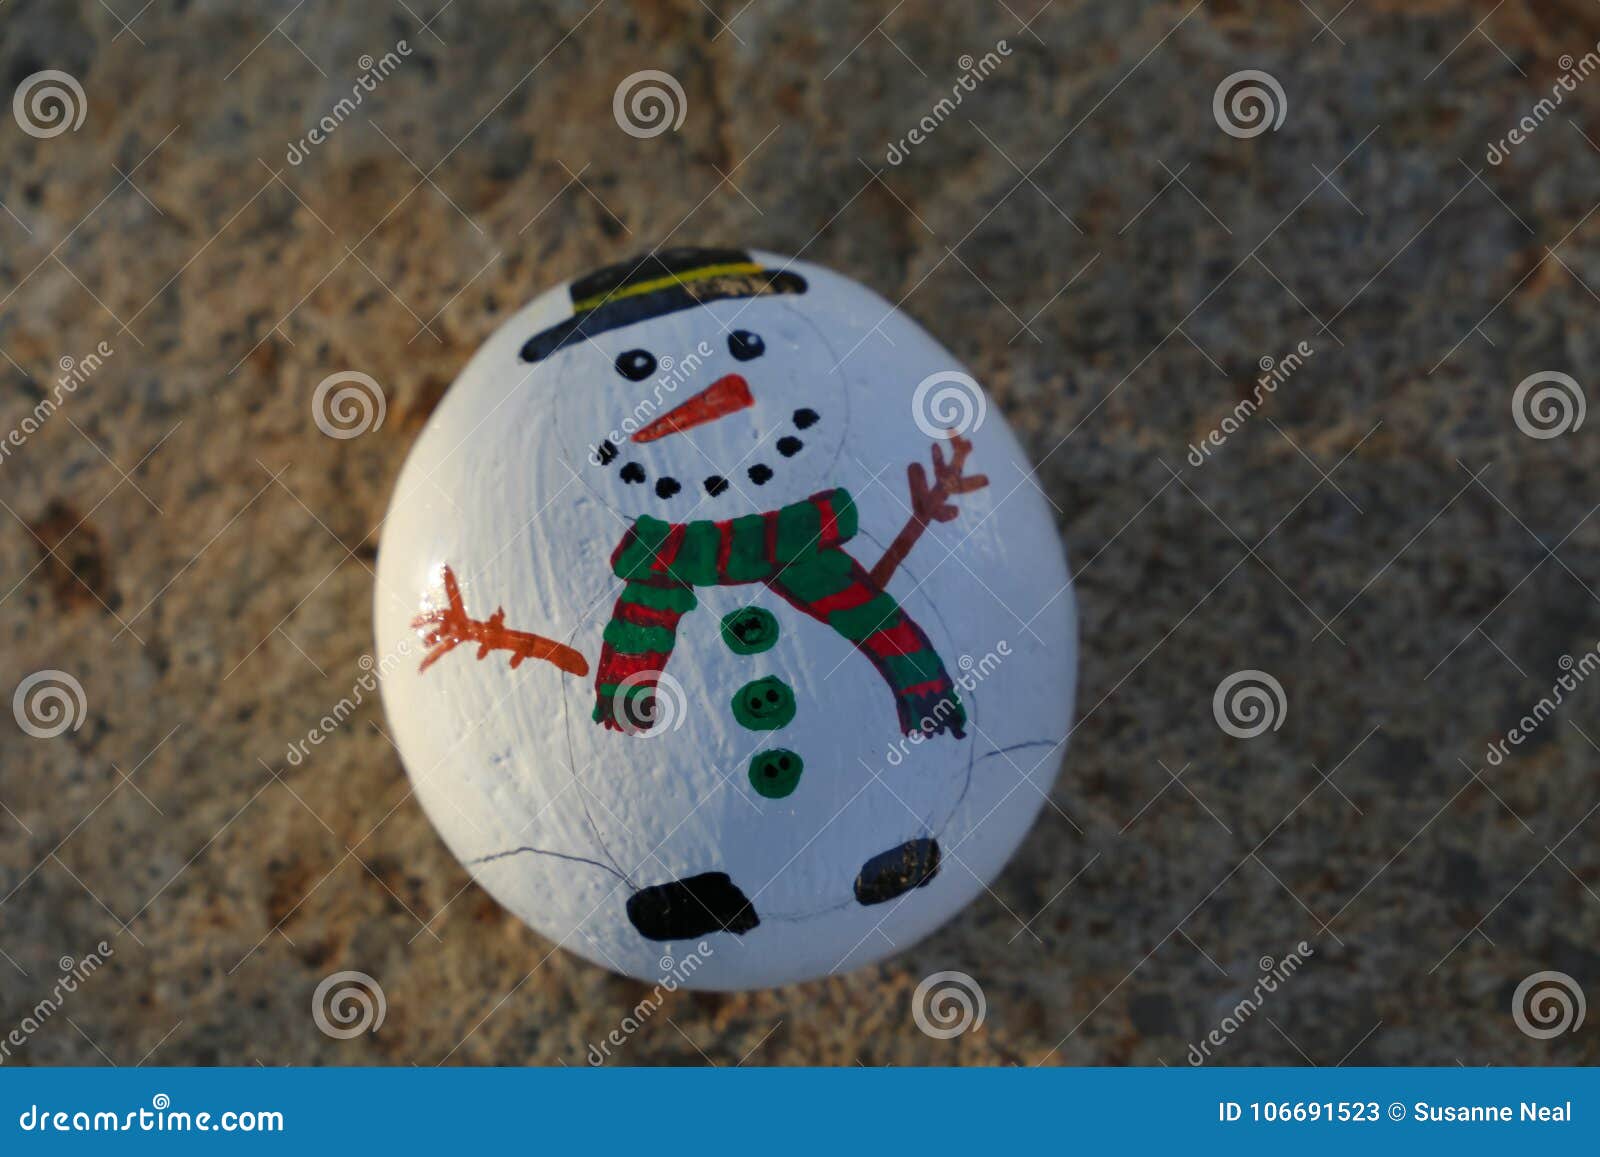 Small White Painted Rock With Snowman Stock Image Image Of Crafty Carrot